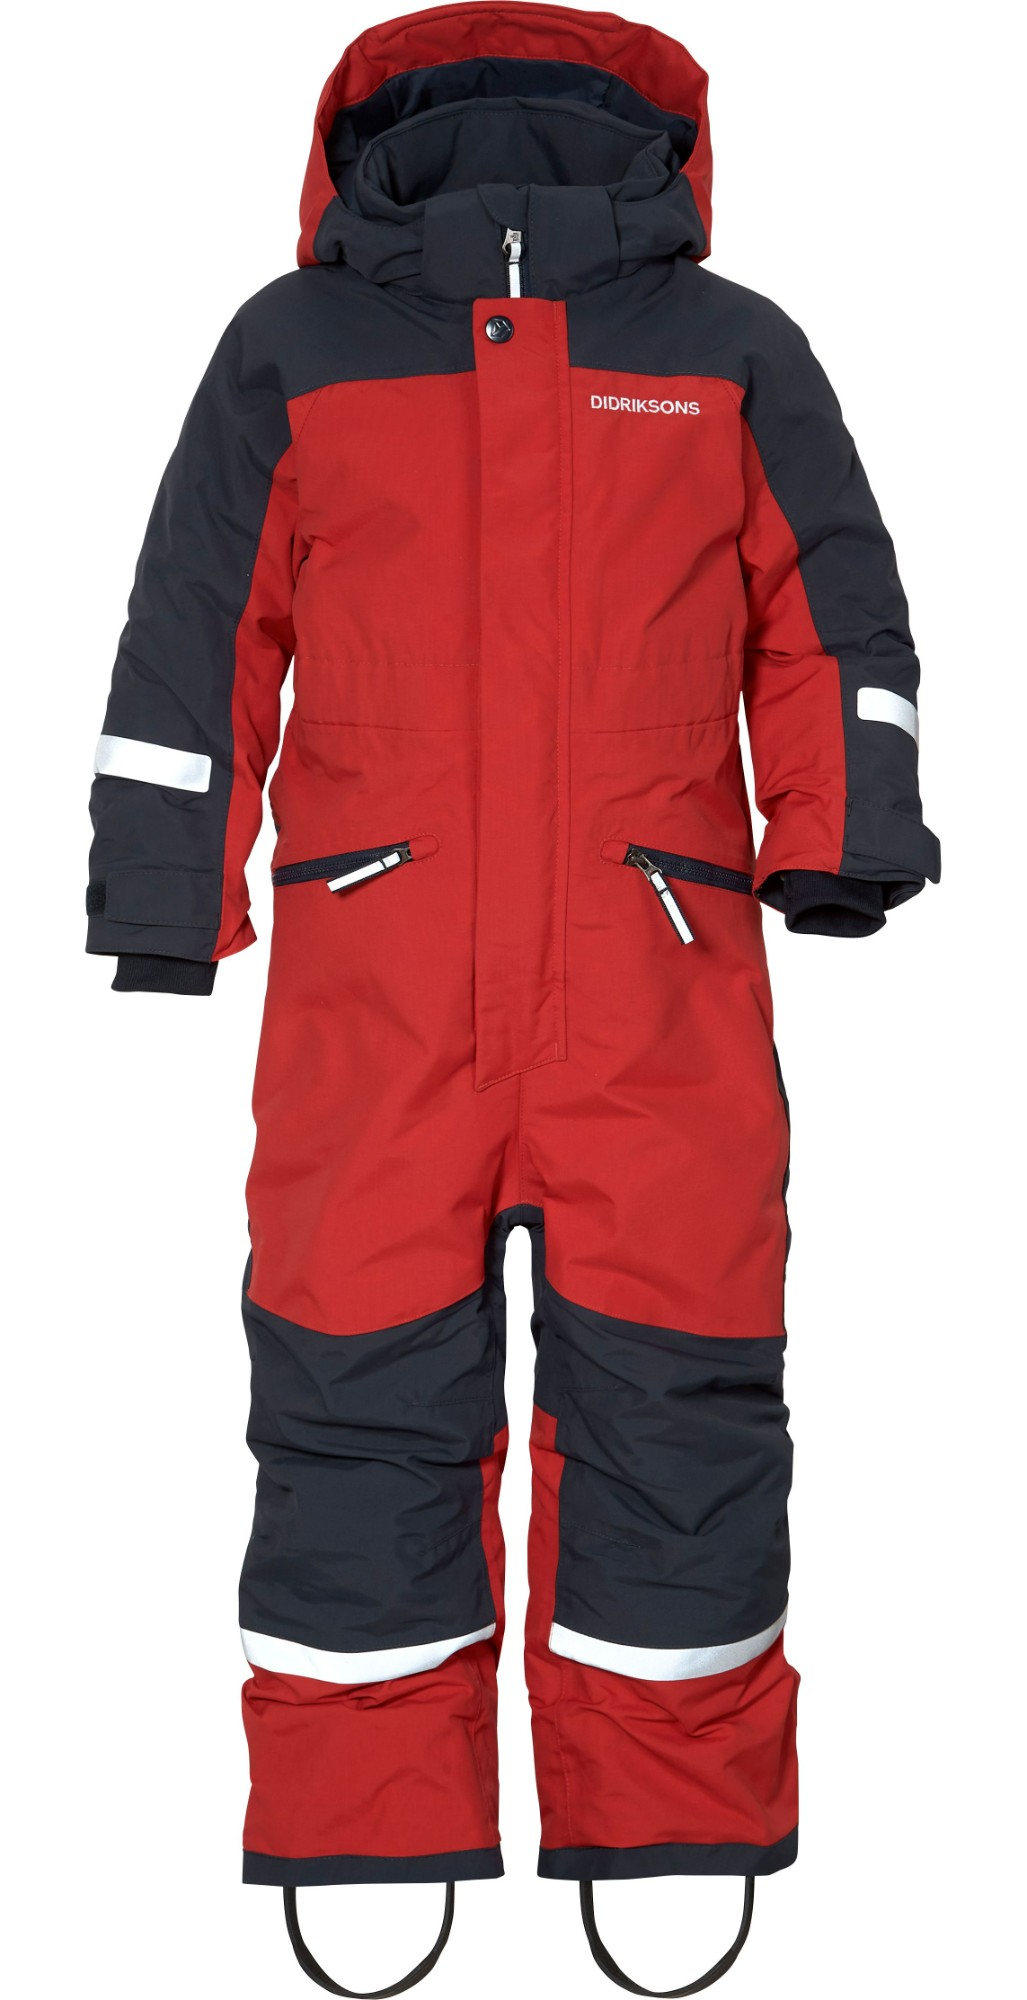 DIDRIKSONS NEPTUN KID'S COVER Race Red 90